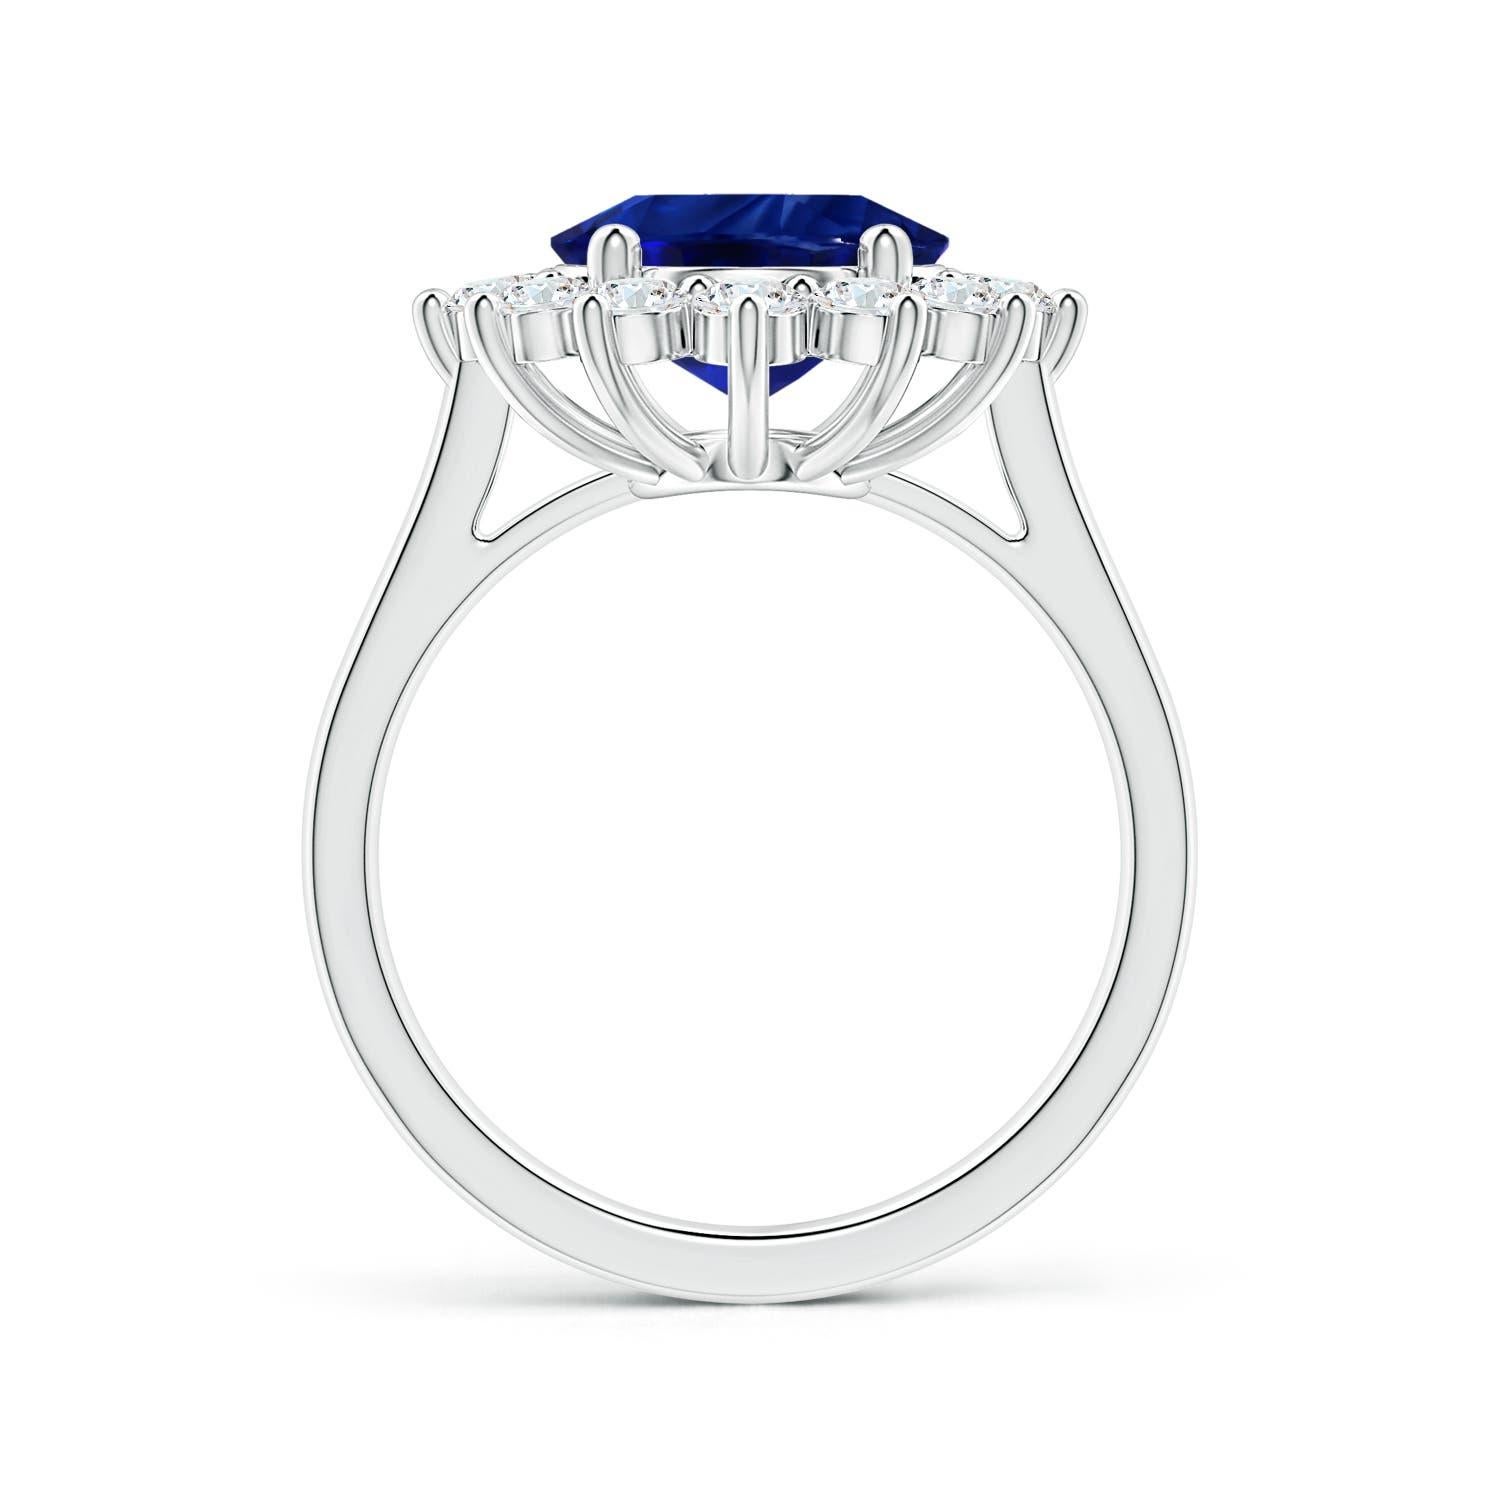 For Sale:  Angara Princess Diana Inspired Gia Certified Blue Sapphire Halo Ring in Platinum 2